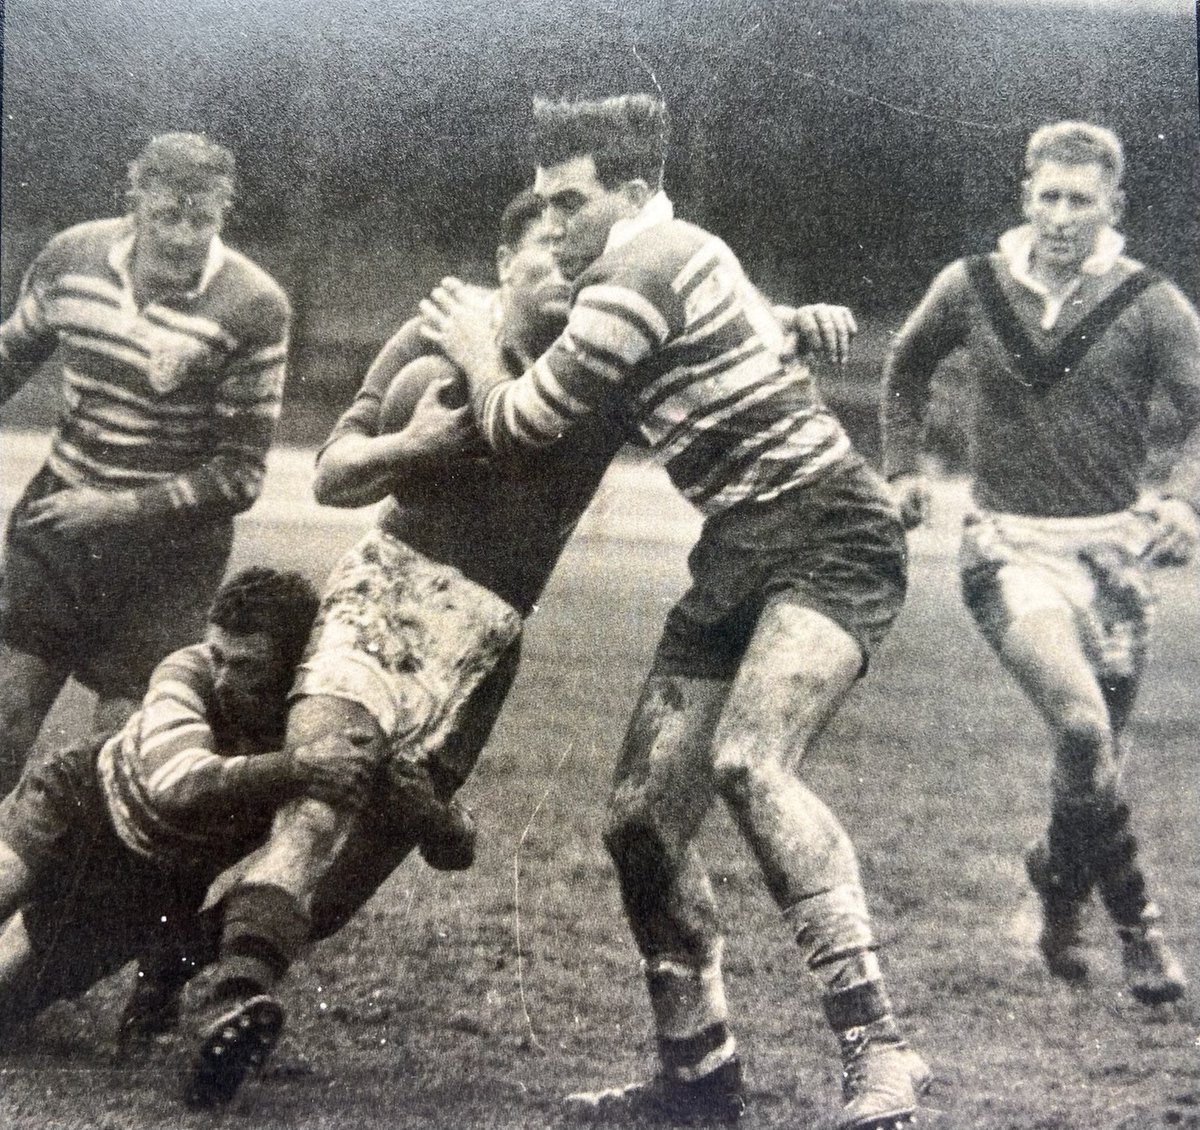 Missing my darling dad today. Here he is tackling for the Bulldogs in the Grand Final at the Sydney Cricket Ground in 1951. He won the prize for fastest Front Row Forward of the year. A dry, wry, kind, strong but also gentle man. Adored by his 4 daughters. ❤️ #fathersday